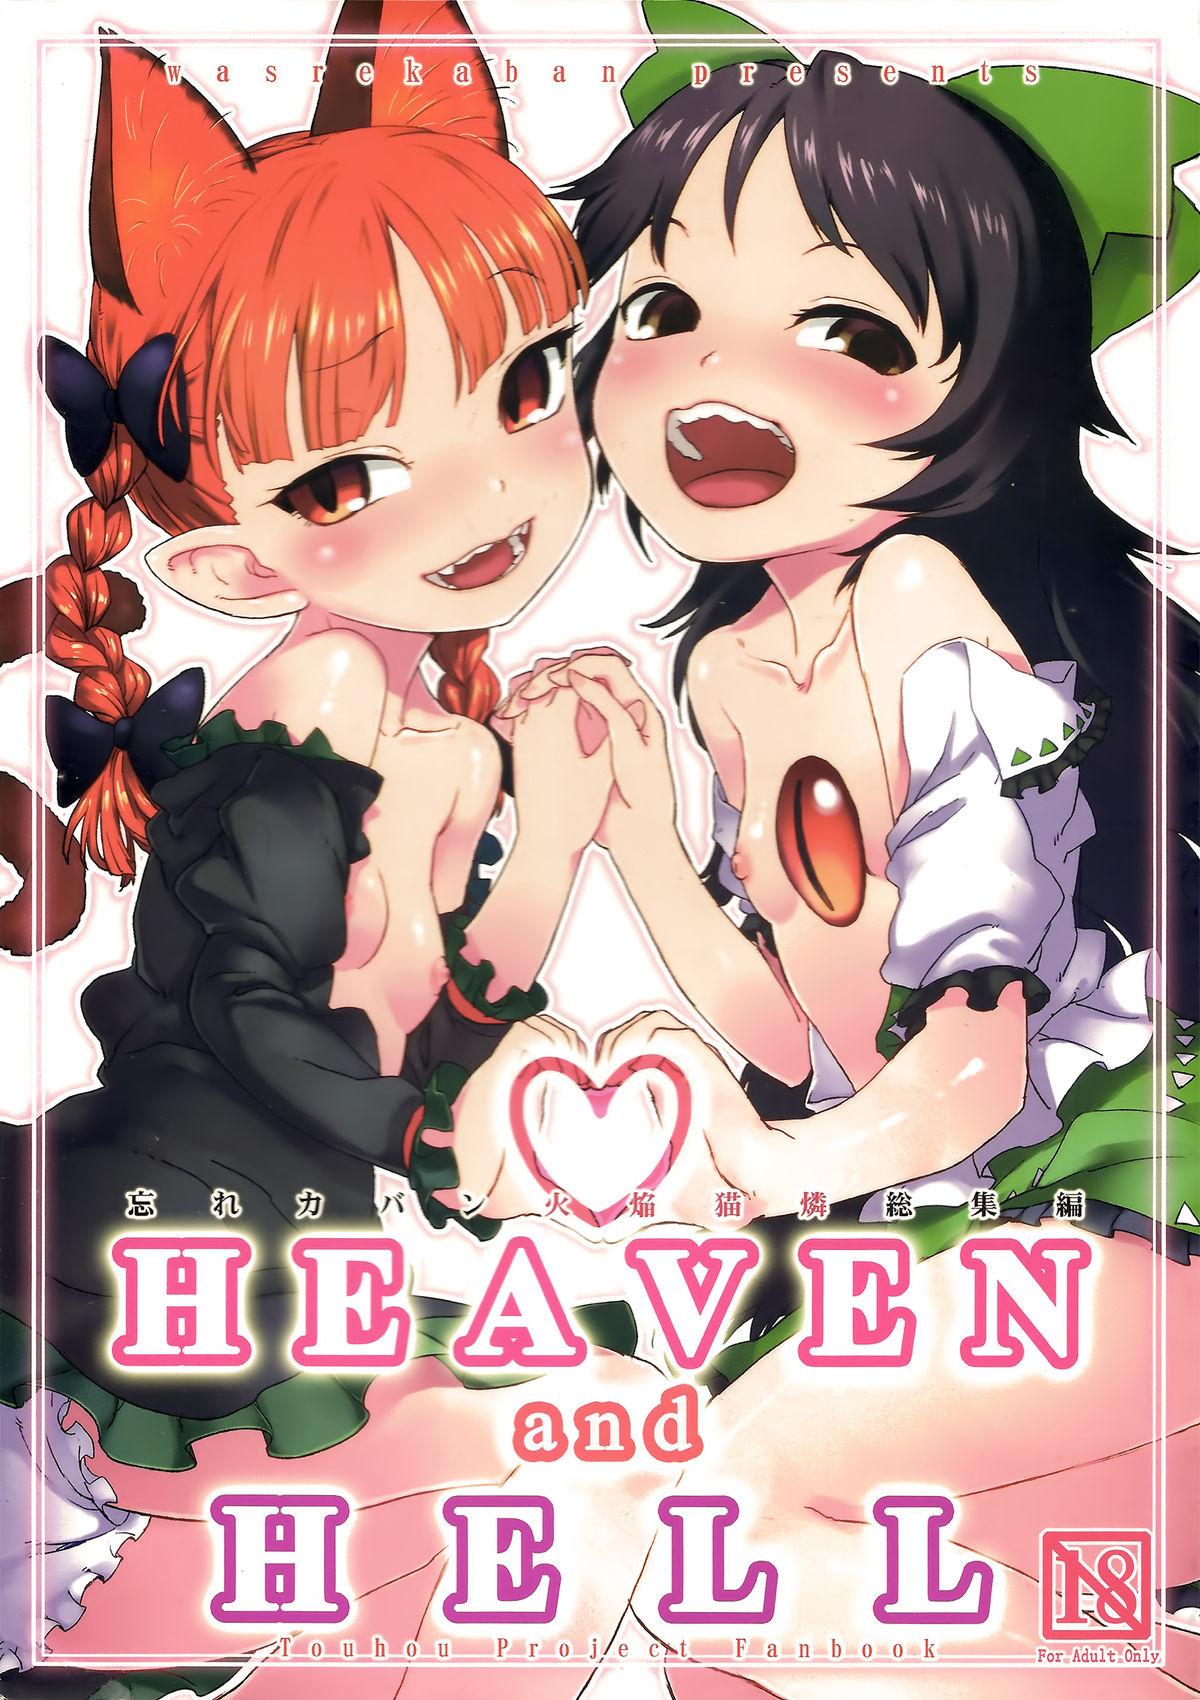 HEAVEN and HELL 0